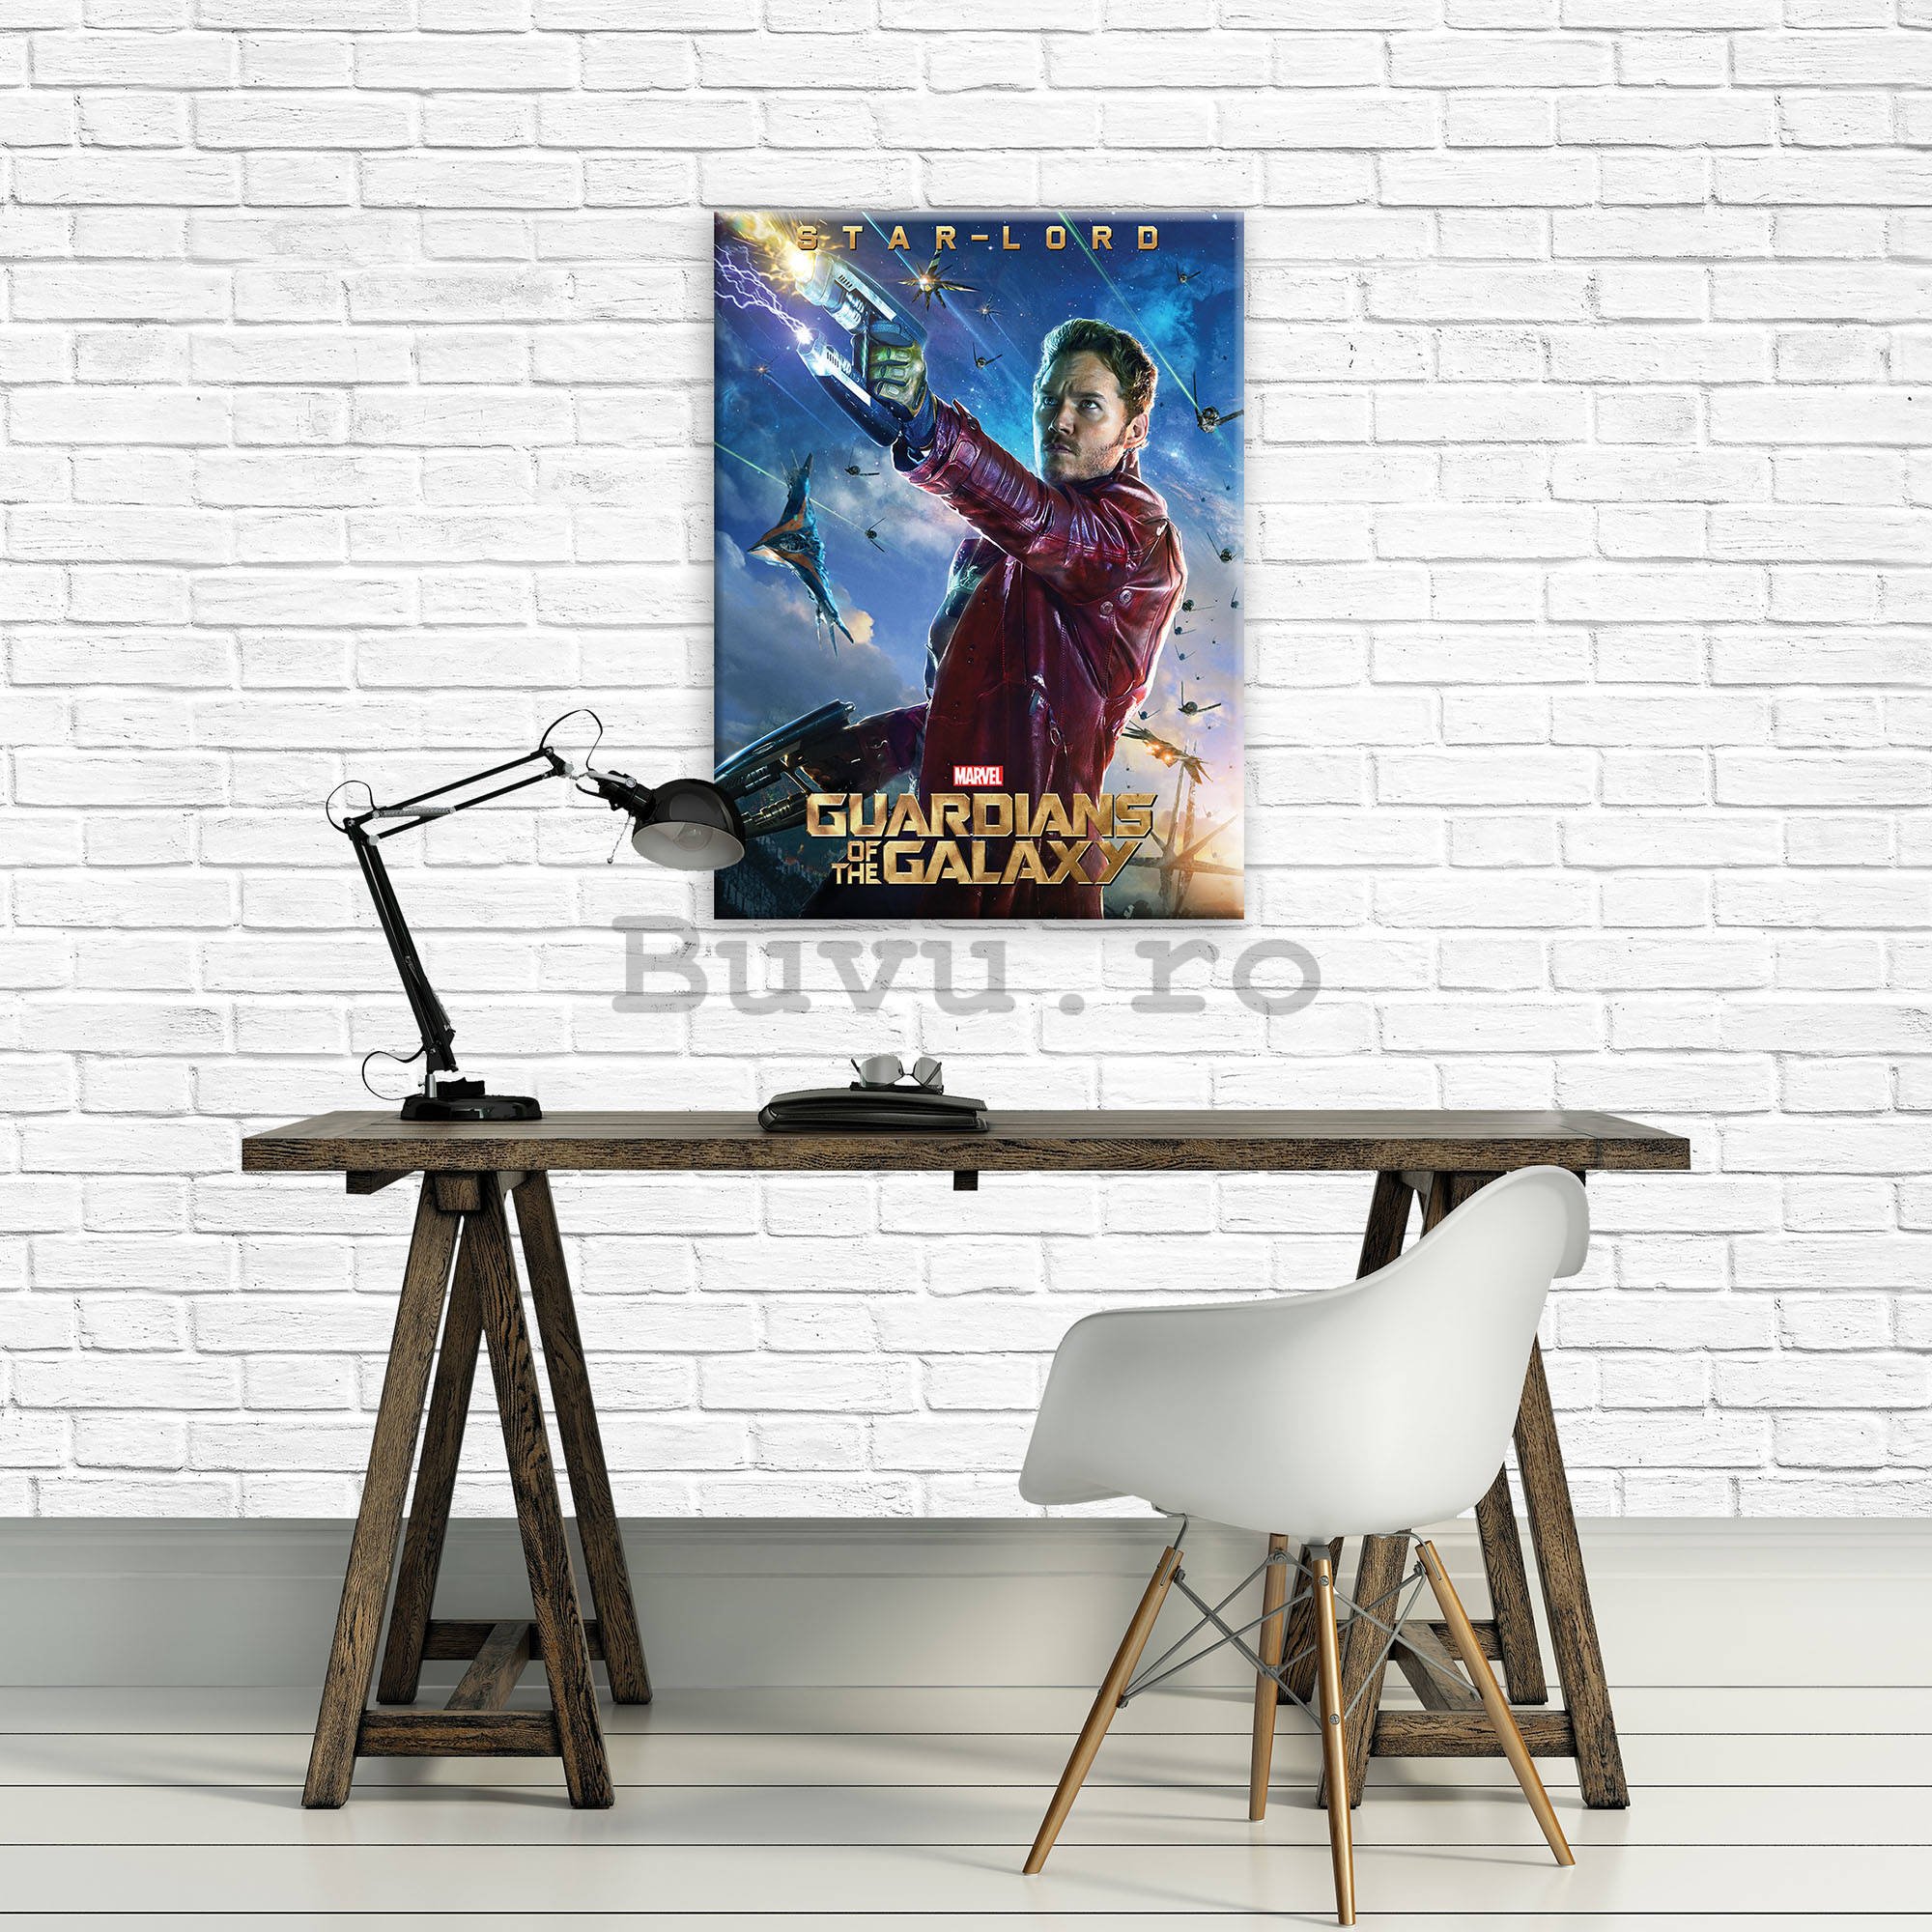 Tablou canvas: Guardians of The Galaxy Star-Lord - 60x80 cm